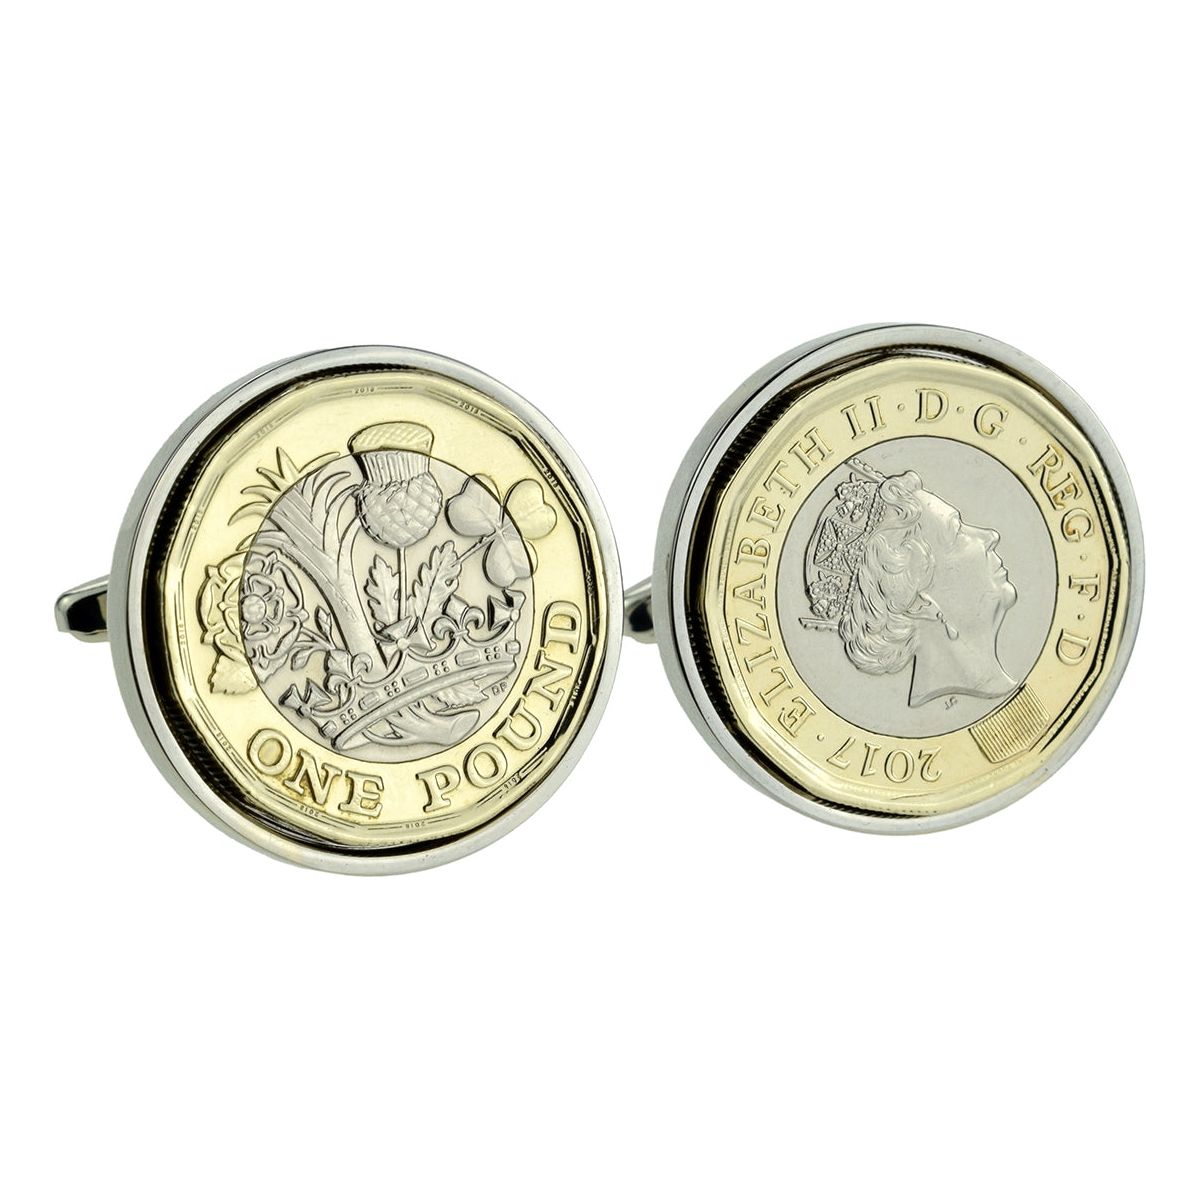 Polished £1 Coin Cufflinks - Ashton and Finch